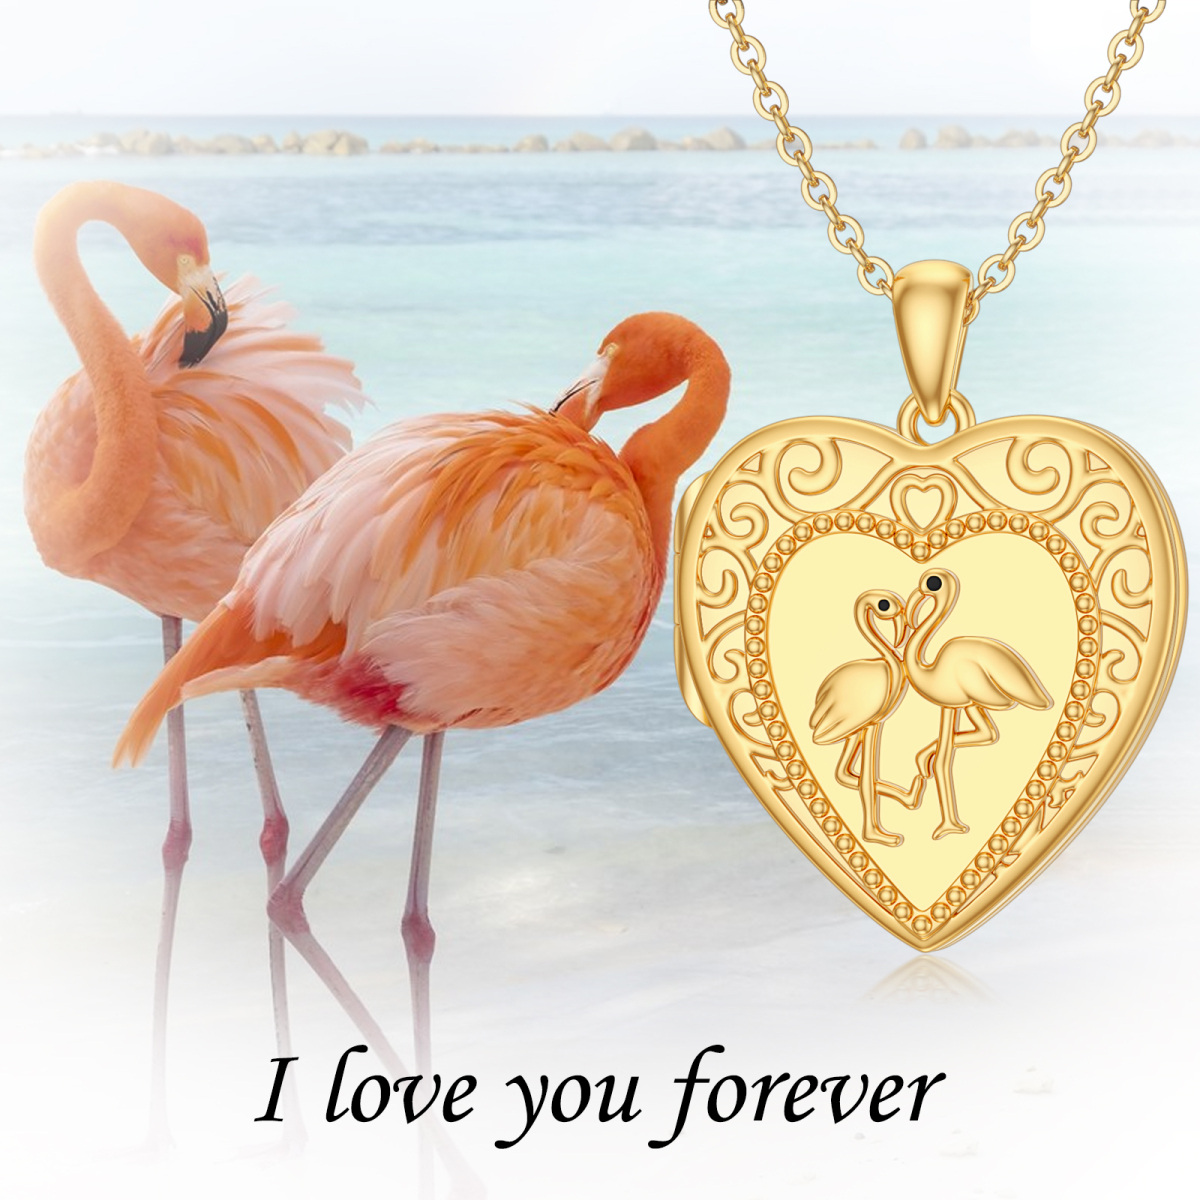 10K Gold Personalized Photo & Heart Pendant Necklace-6